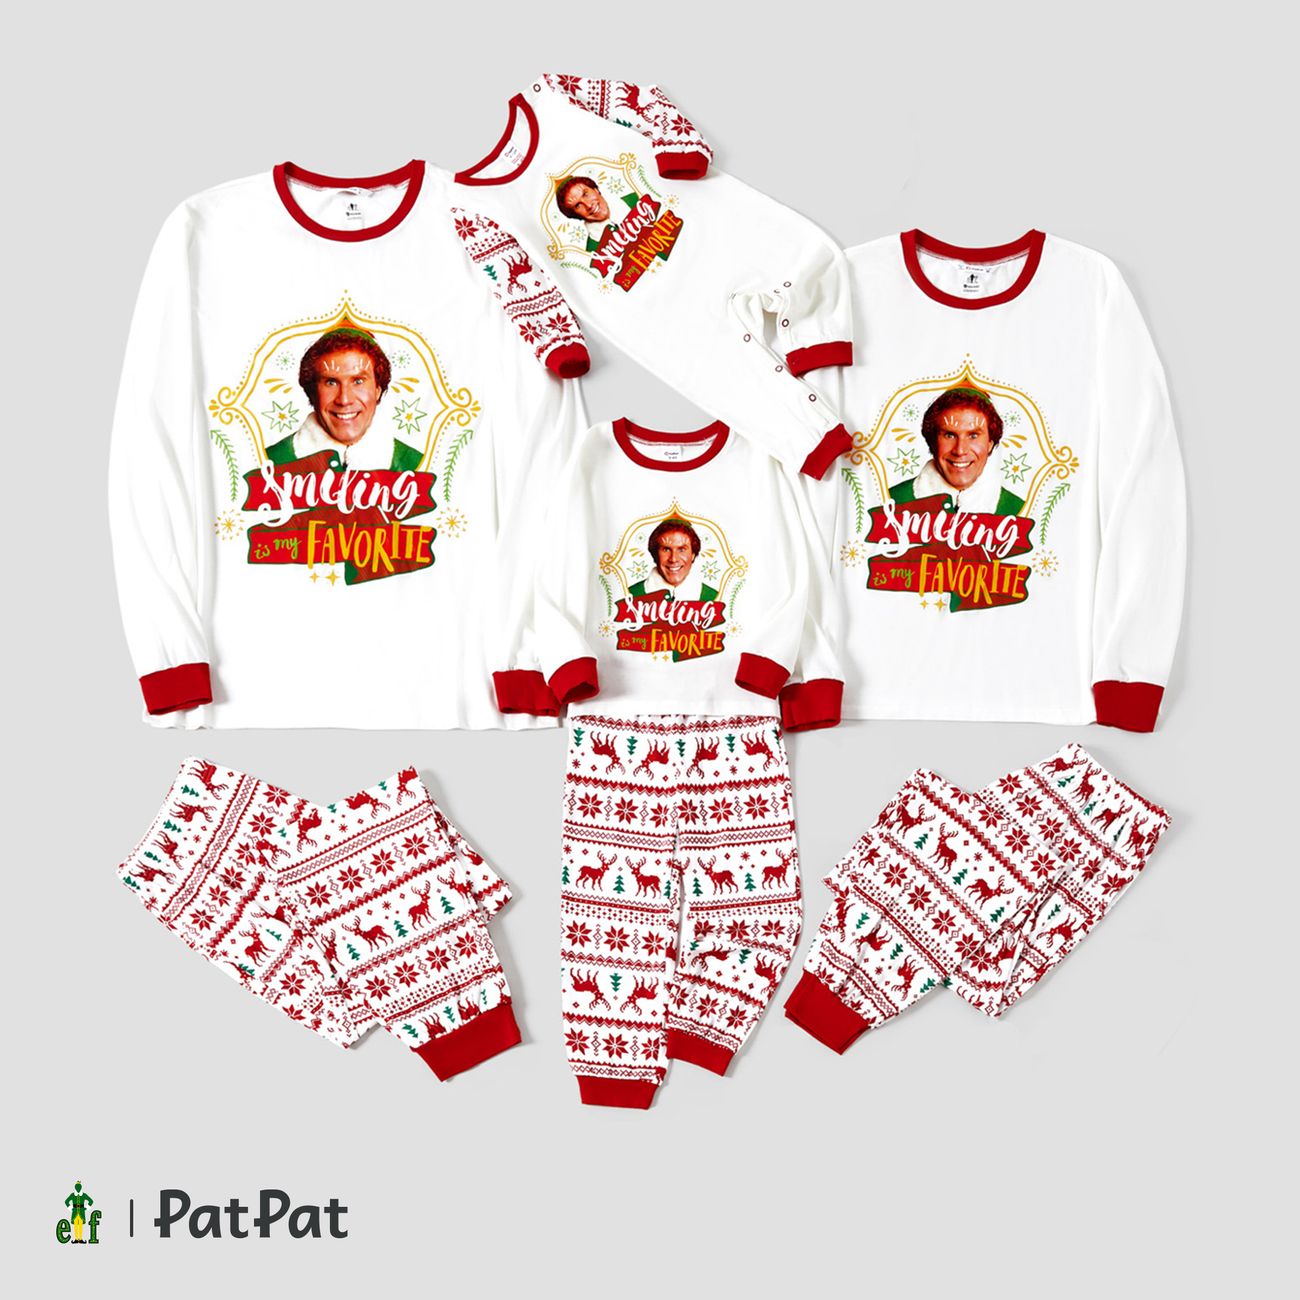 Buy Matching Outfits Christmas Pajamas Clothes Online for Sale - PatPat CA  Mobile